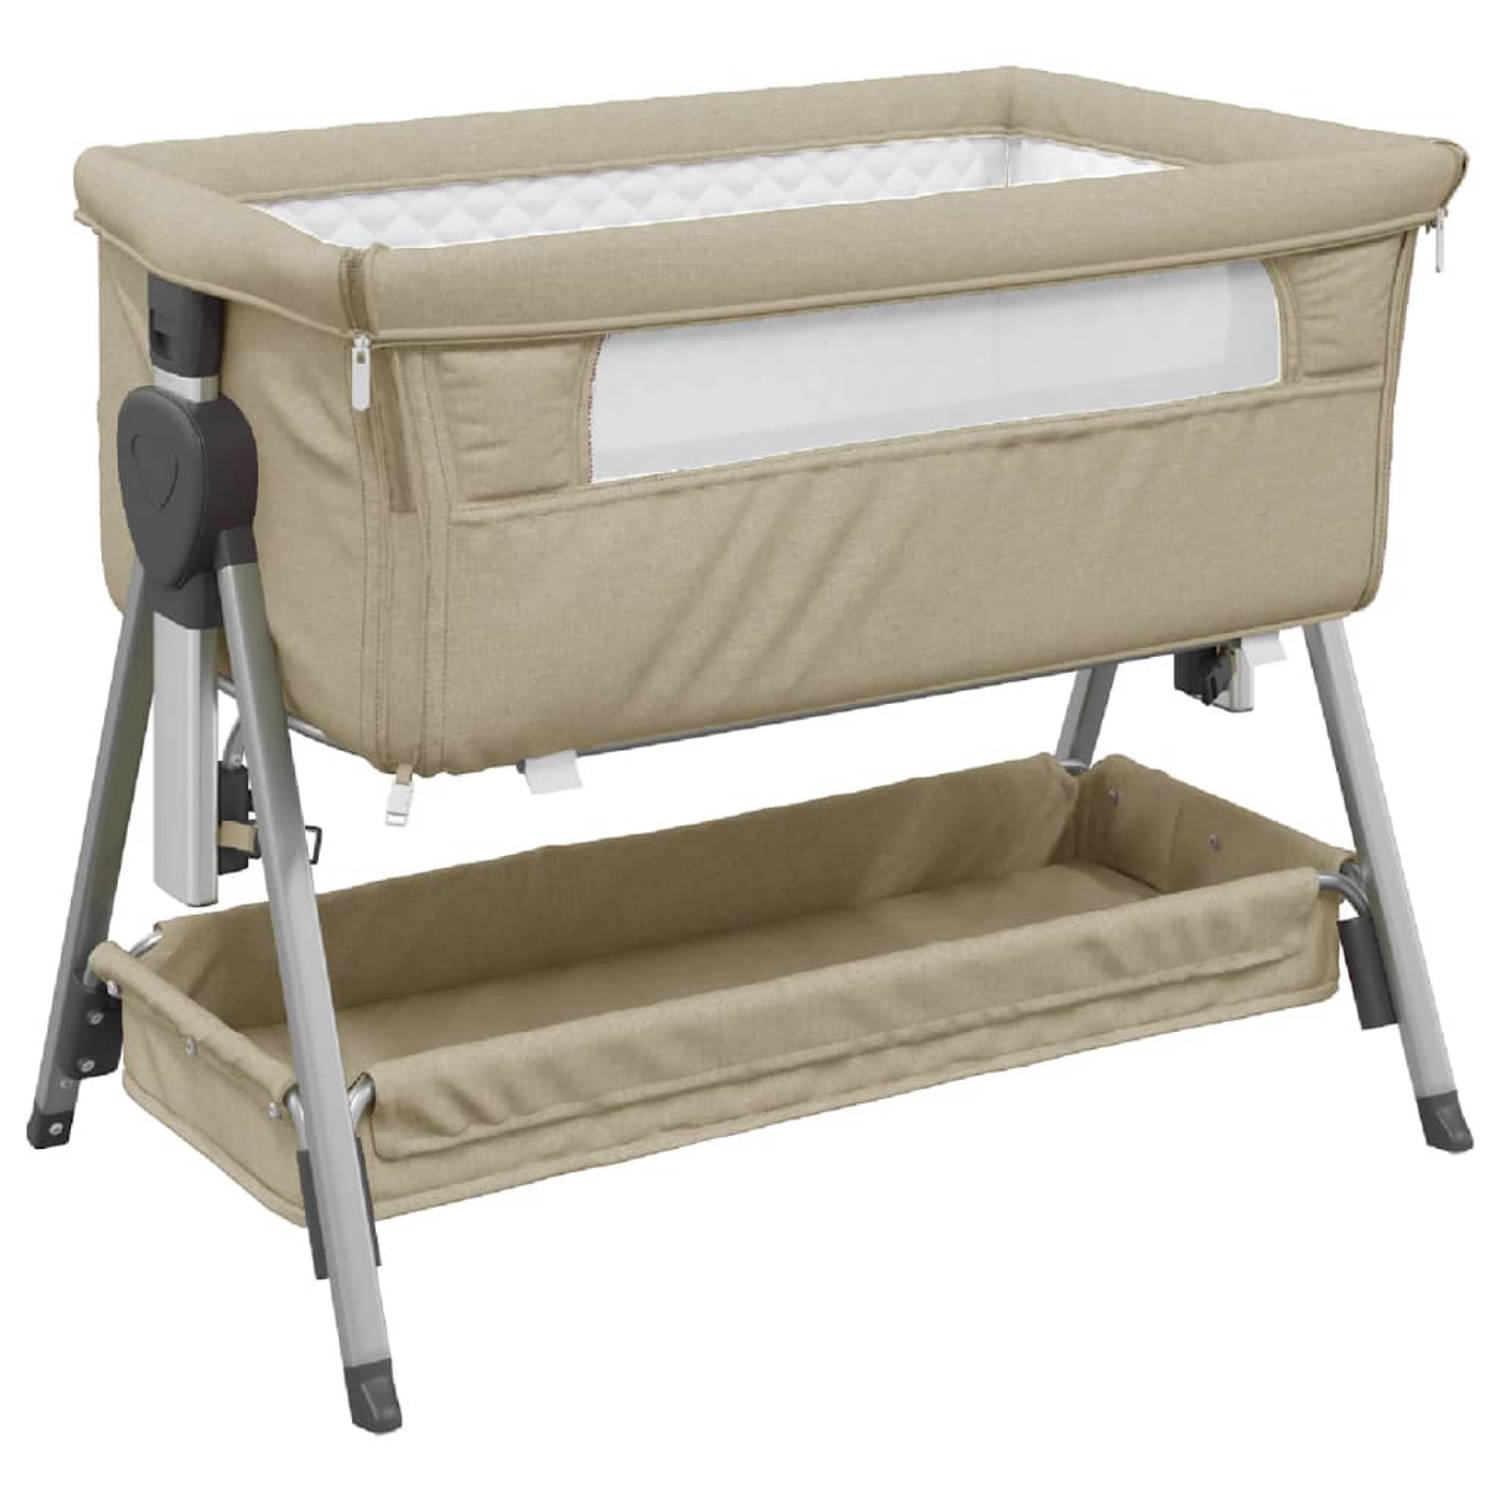 The Living Store Babybedje Basic Babybed 93x56x(70-82) cm taupe